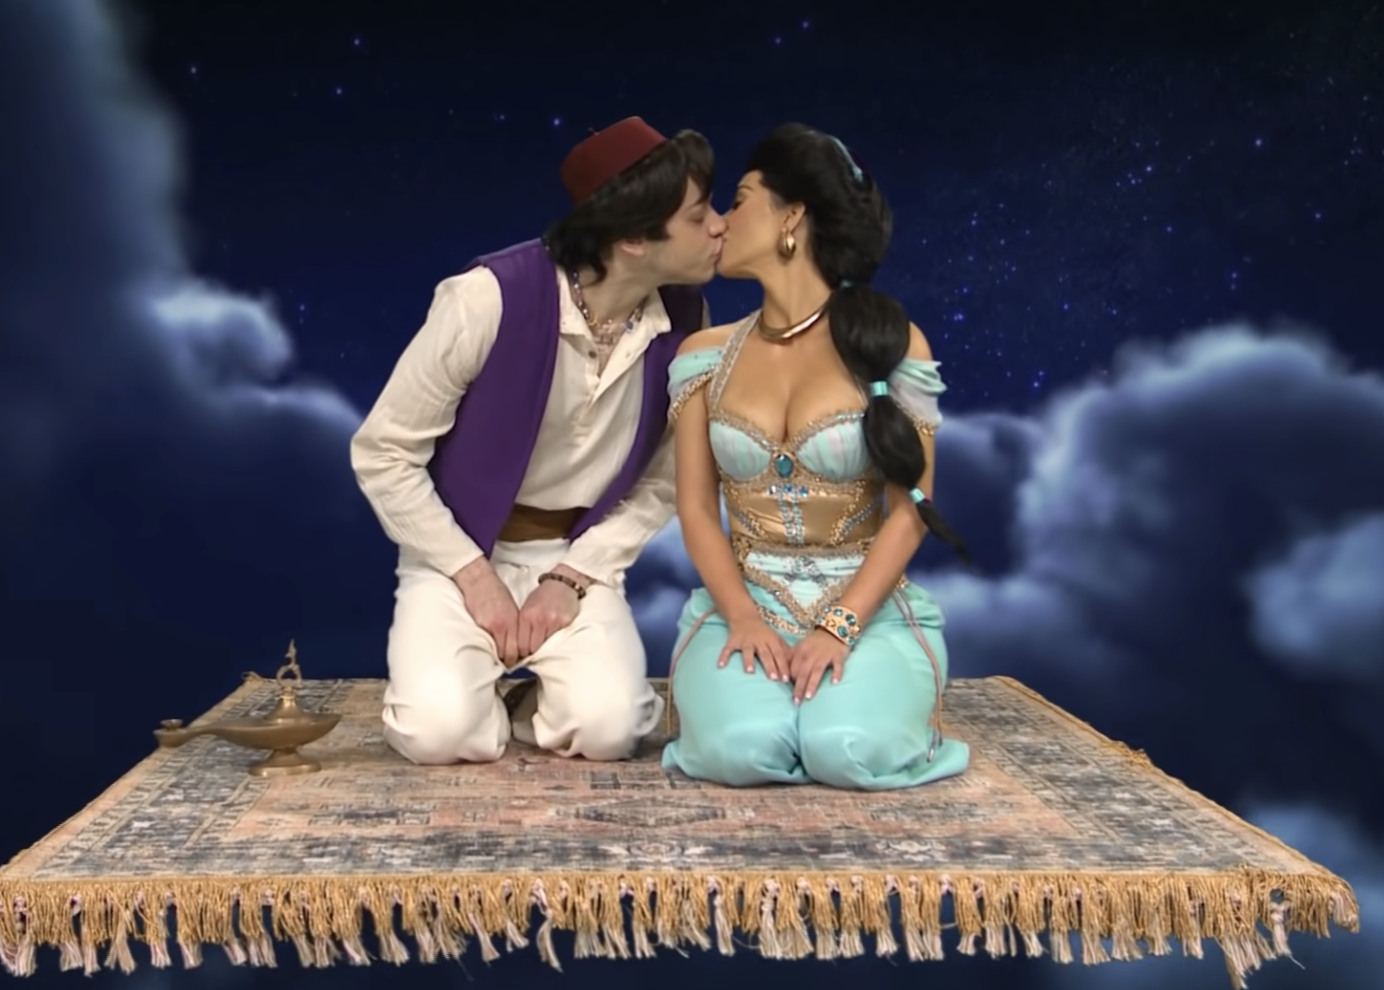 Pete and Kim kissing during a SNL sketch where they portrayed Aladdin and Princess Jasmine